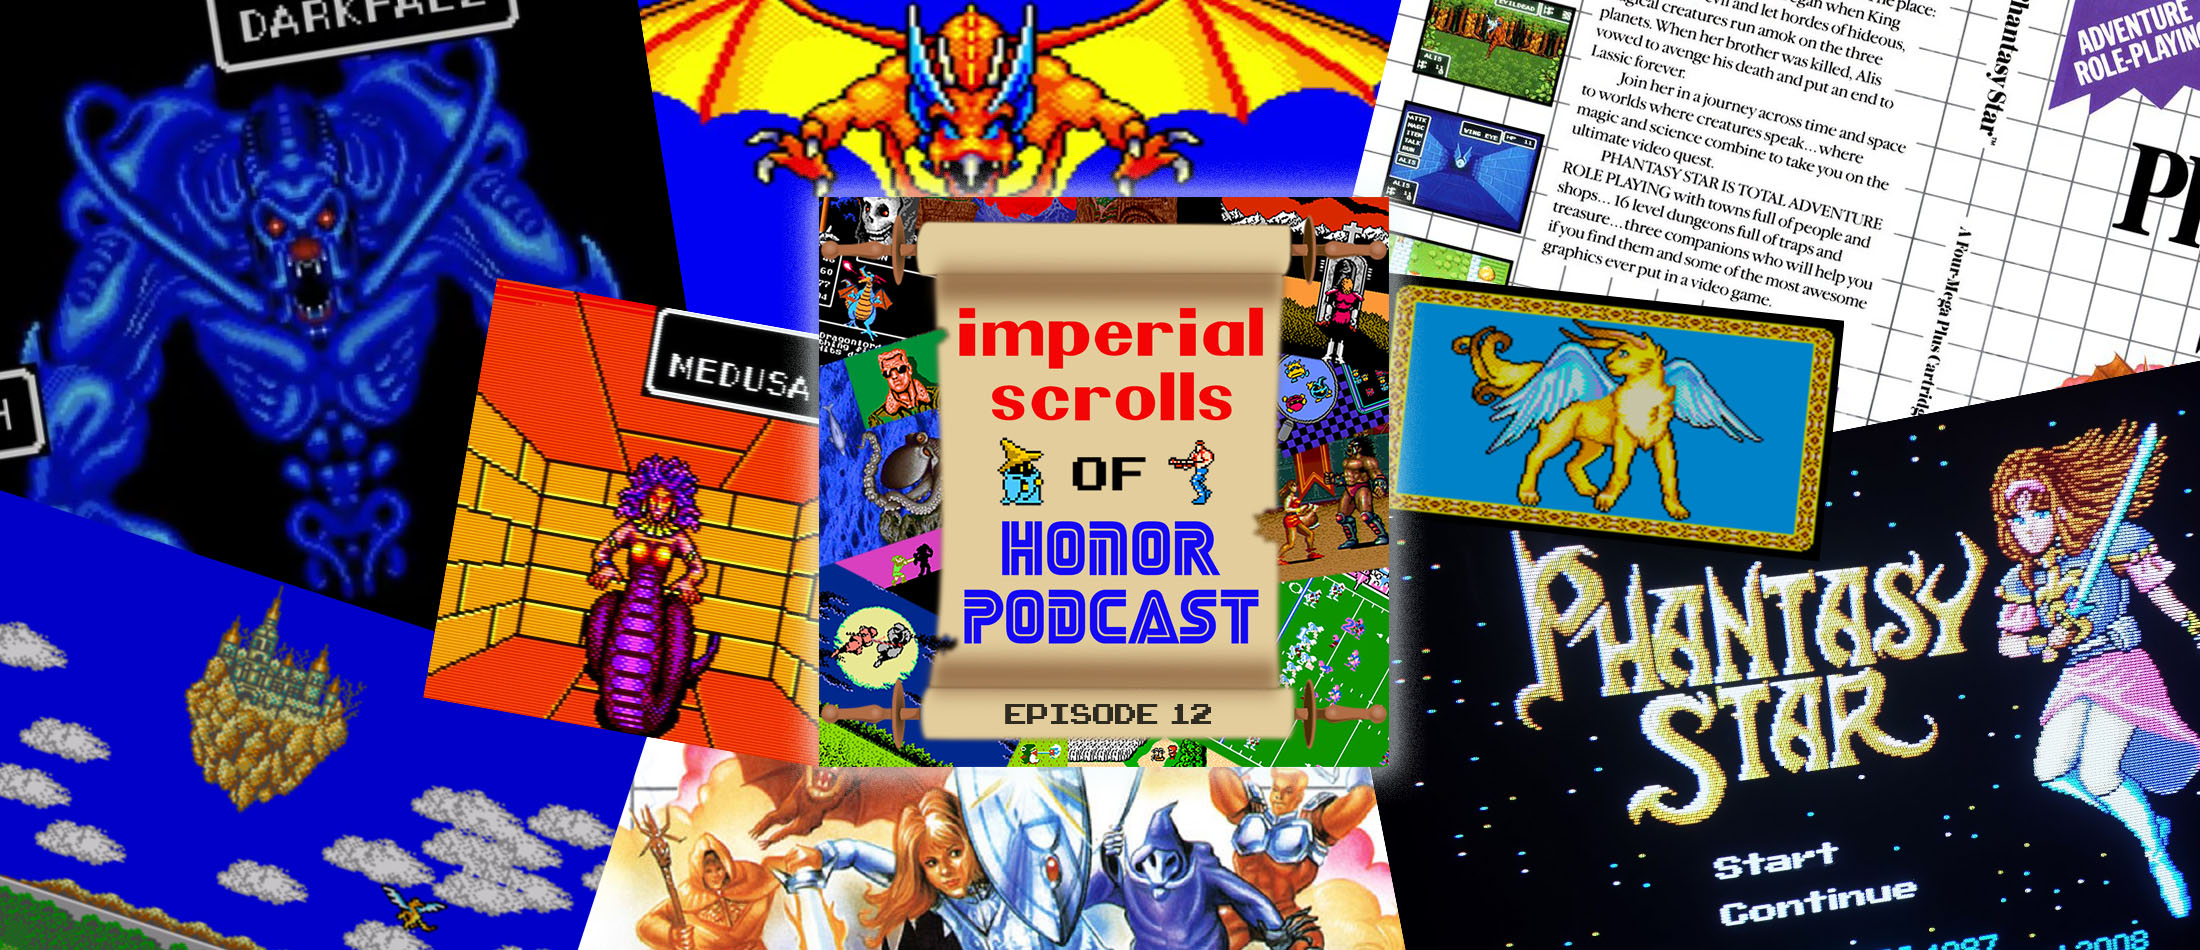 Imperial Scrolls of Honor Podcast - Episode 12 - Phantasy Star (SMS)